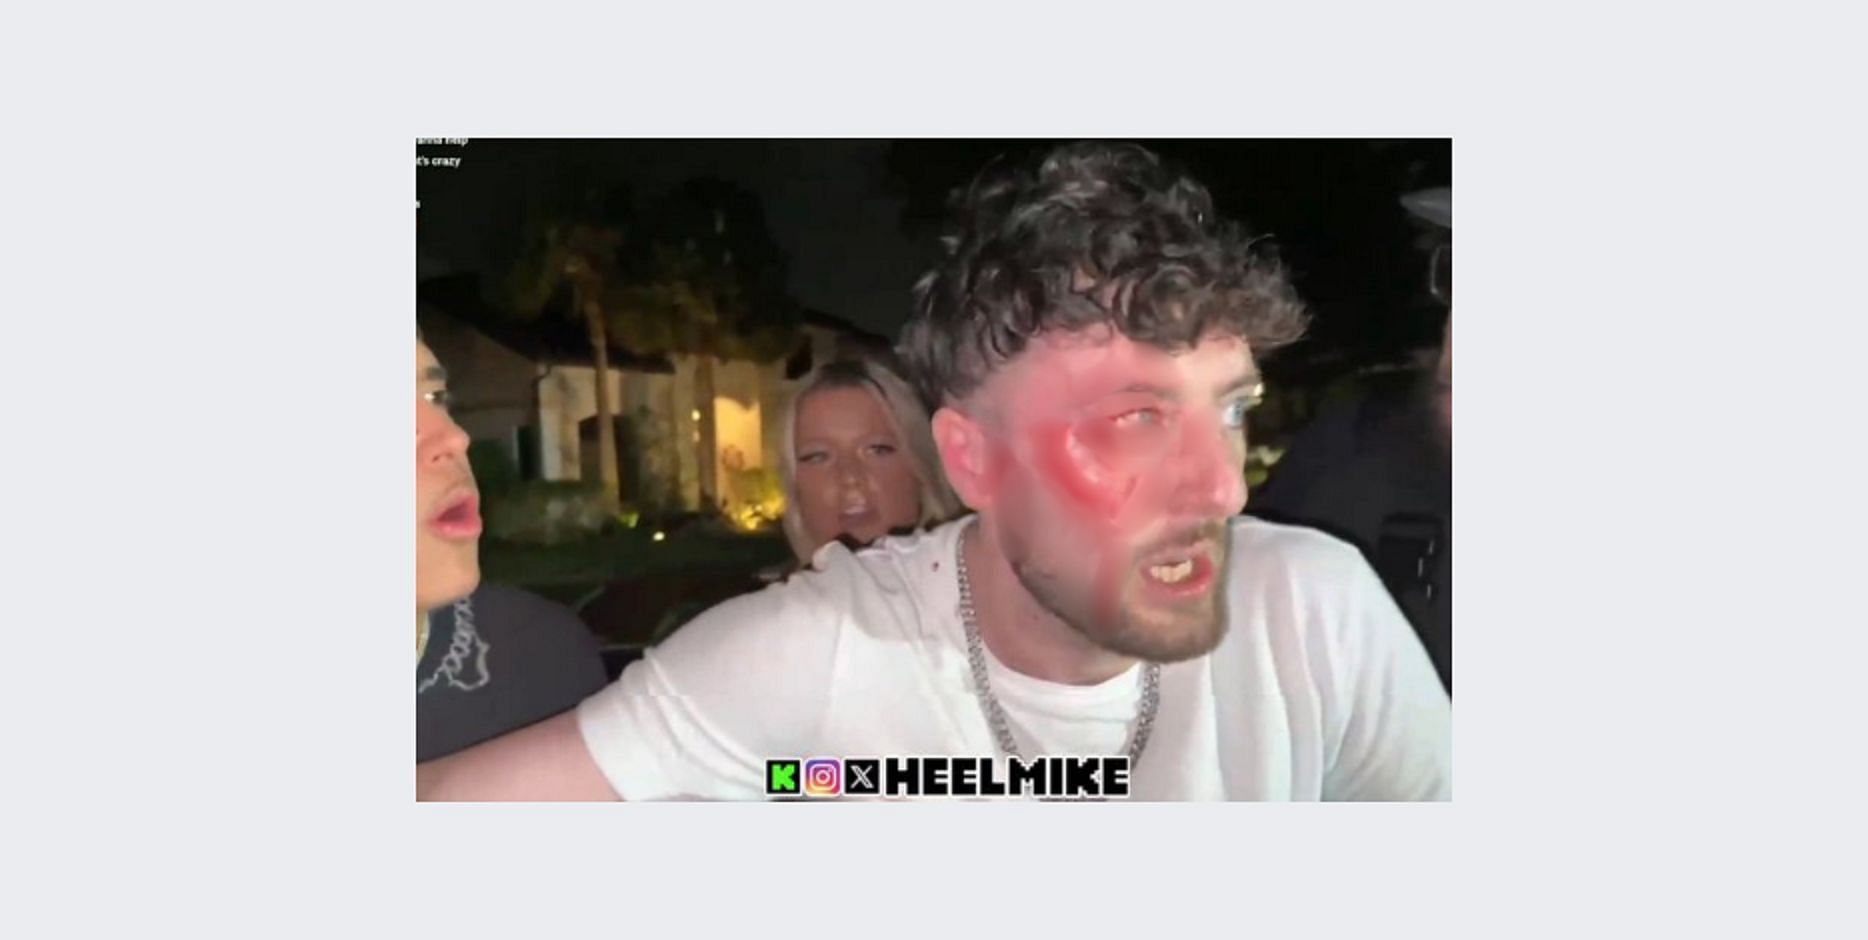 Heelmike ends up with a bloody face (Image via X)